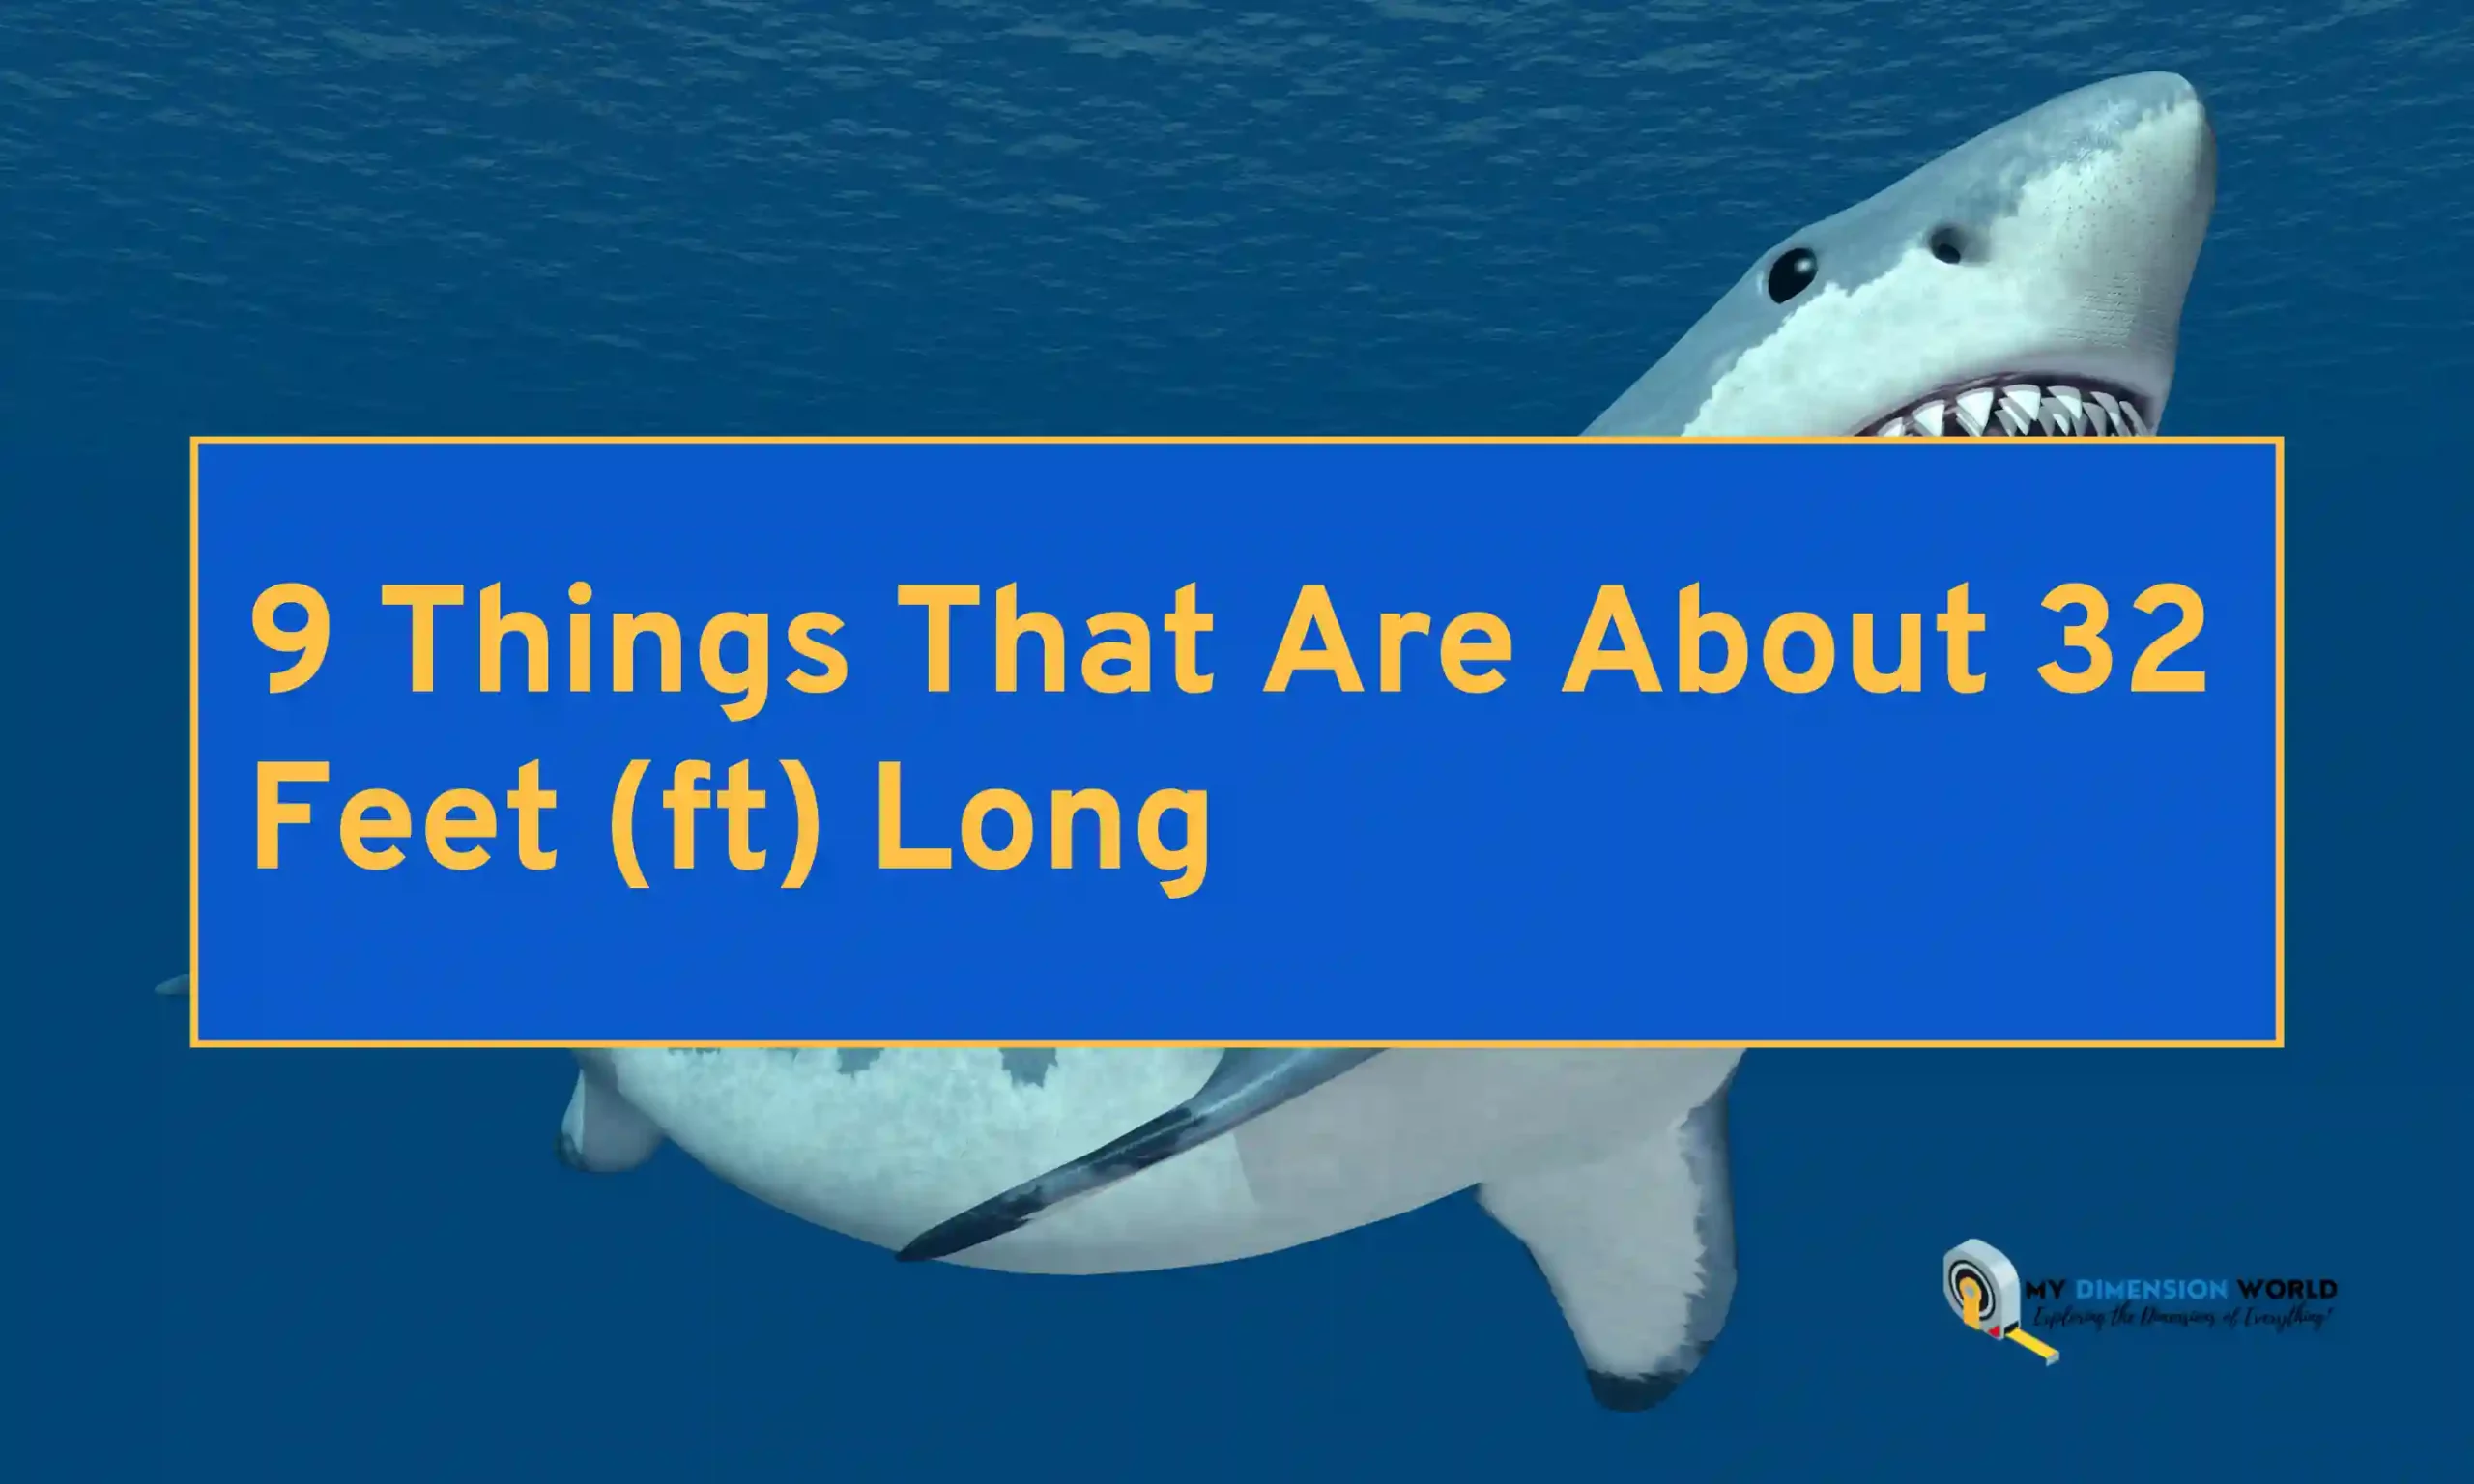 9 Things That Are About 32 Feet (ft) Long